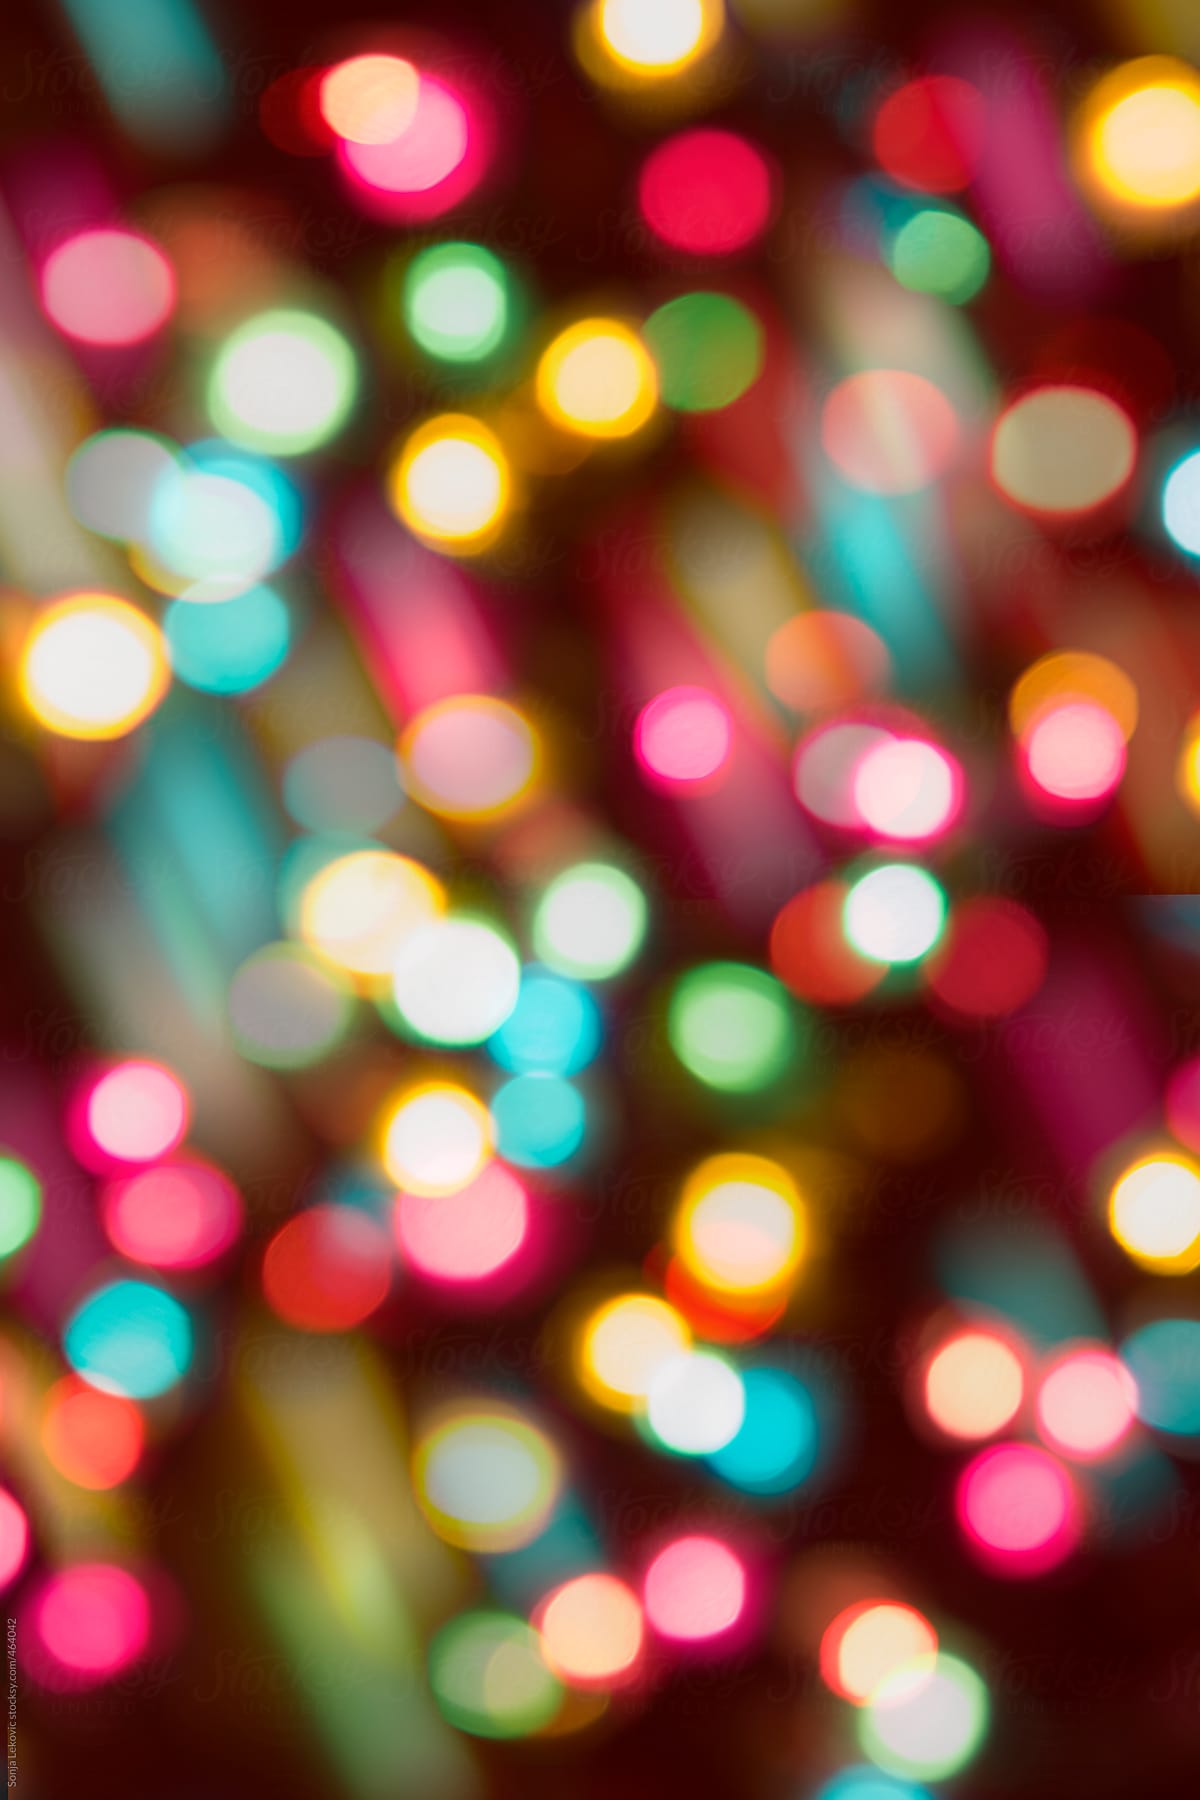 colorful party lights in blur background by Sonja Lekovic - Stocksy United